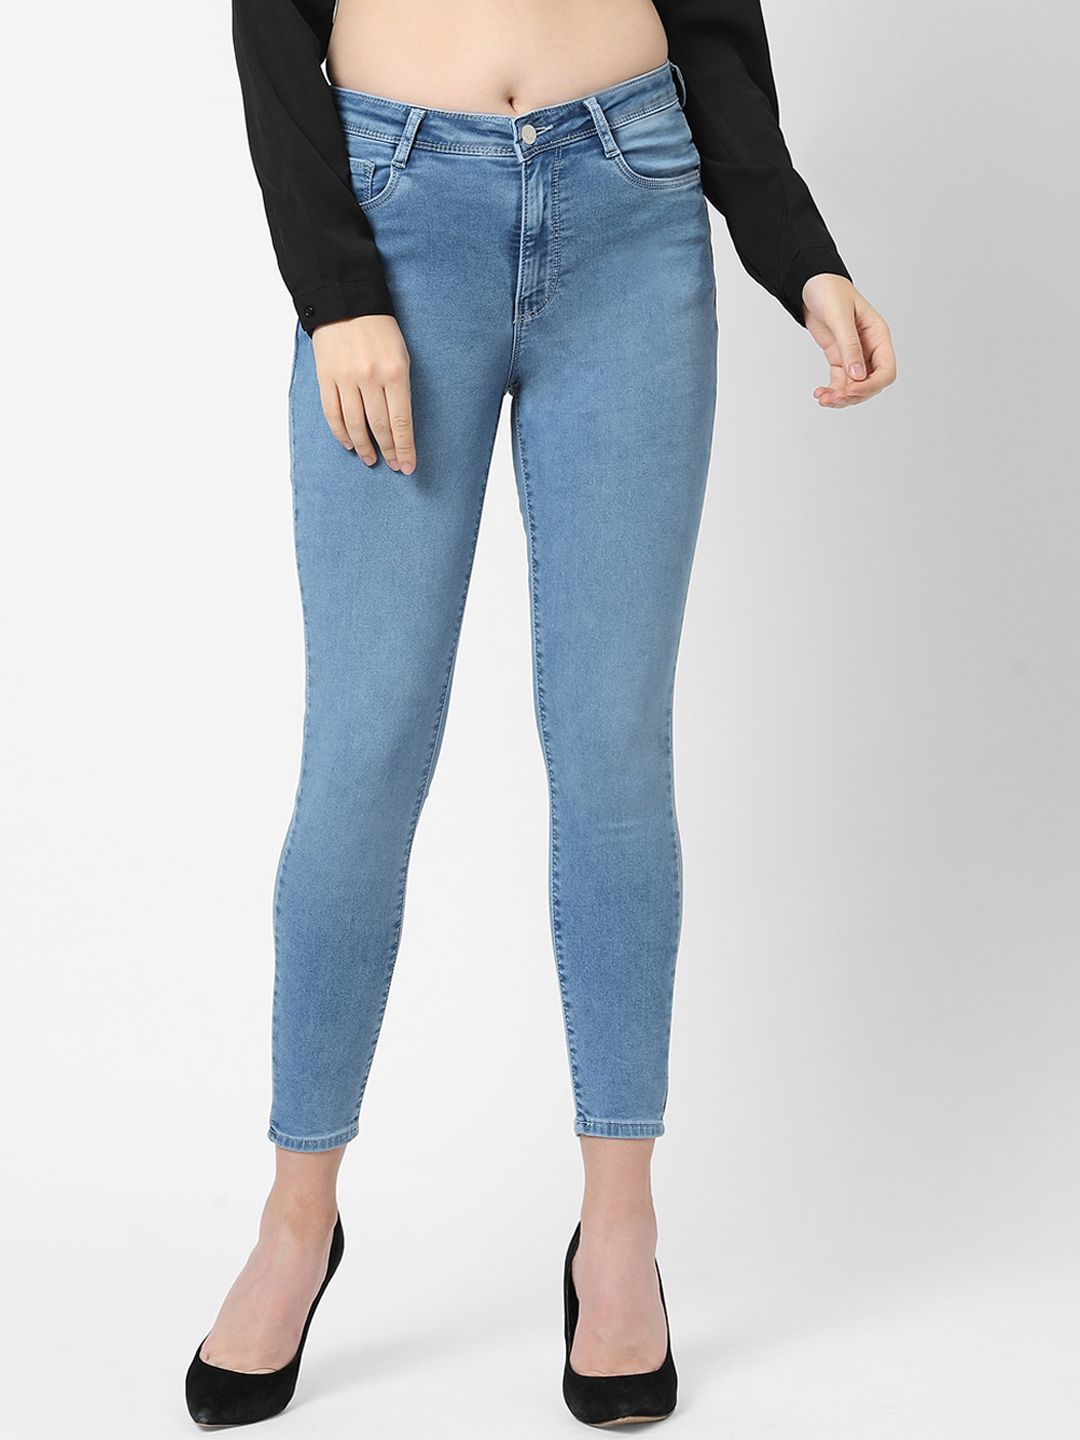 Kraus Jeans Women Blue Skinny Fit High-Rise Stretchable Jeans Price in India